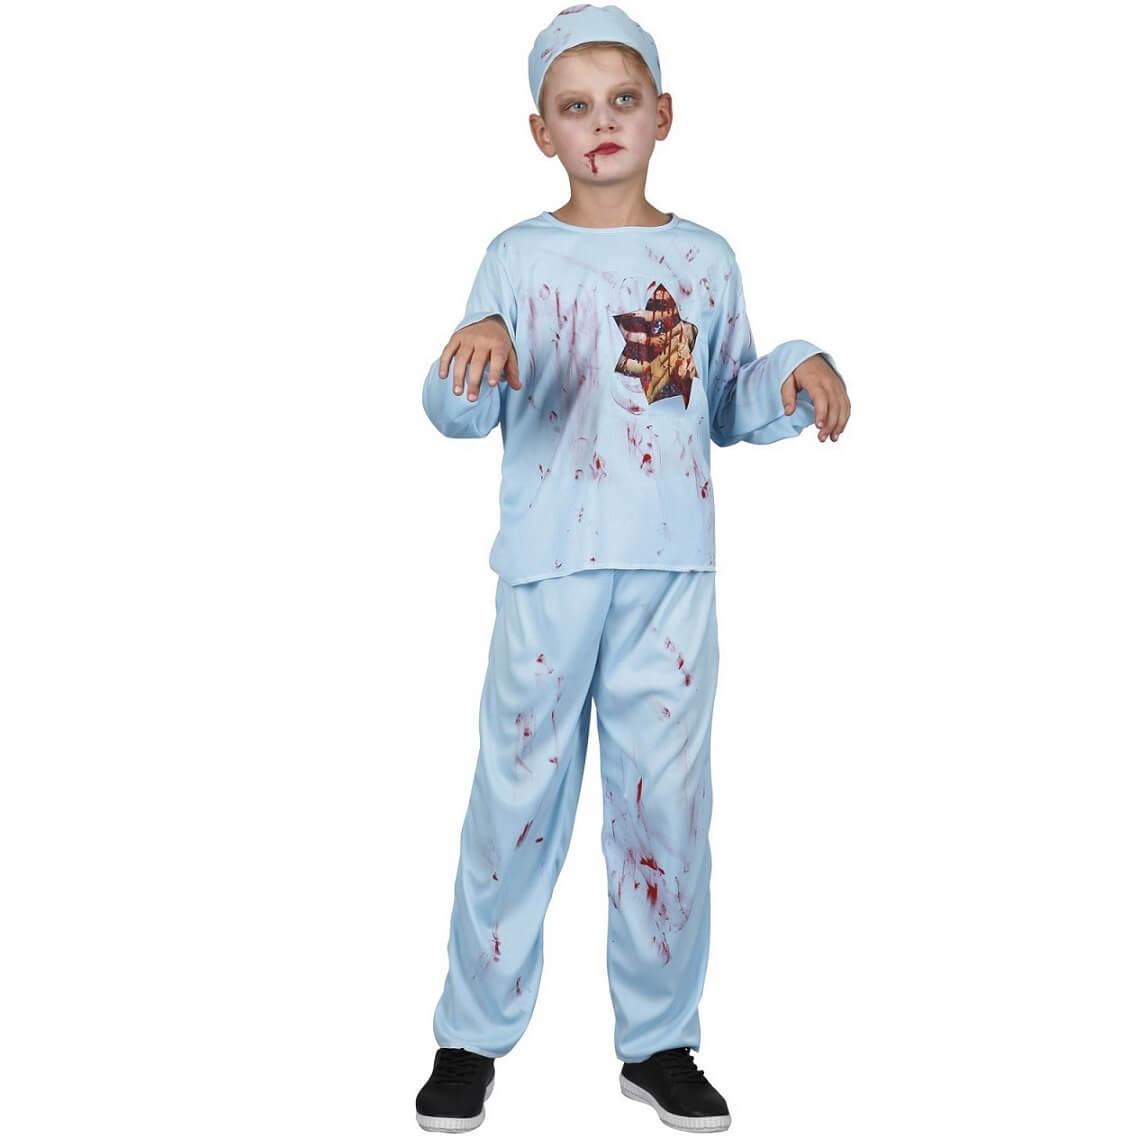 Costume enfant halloween chirurgien sanglant taille 5 a 6 ans